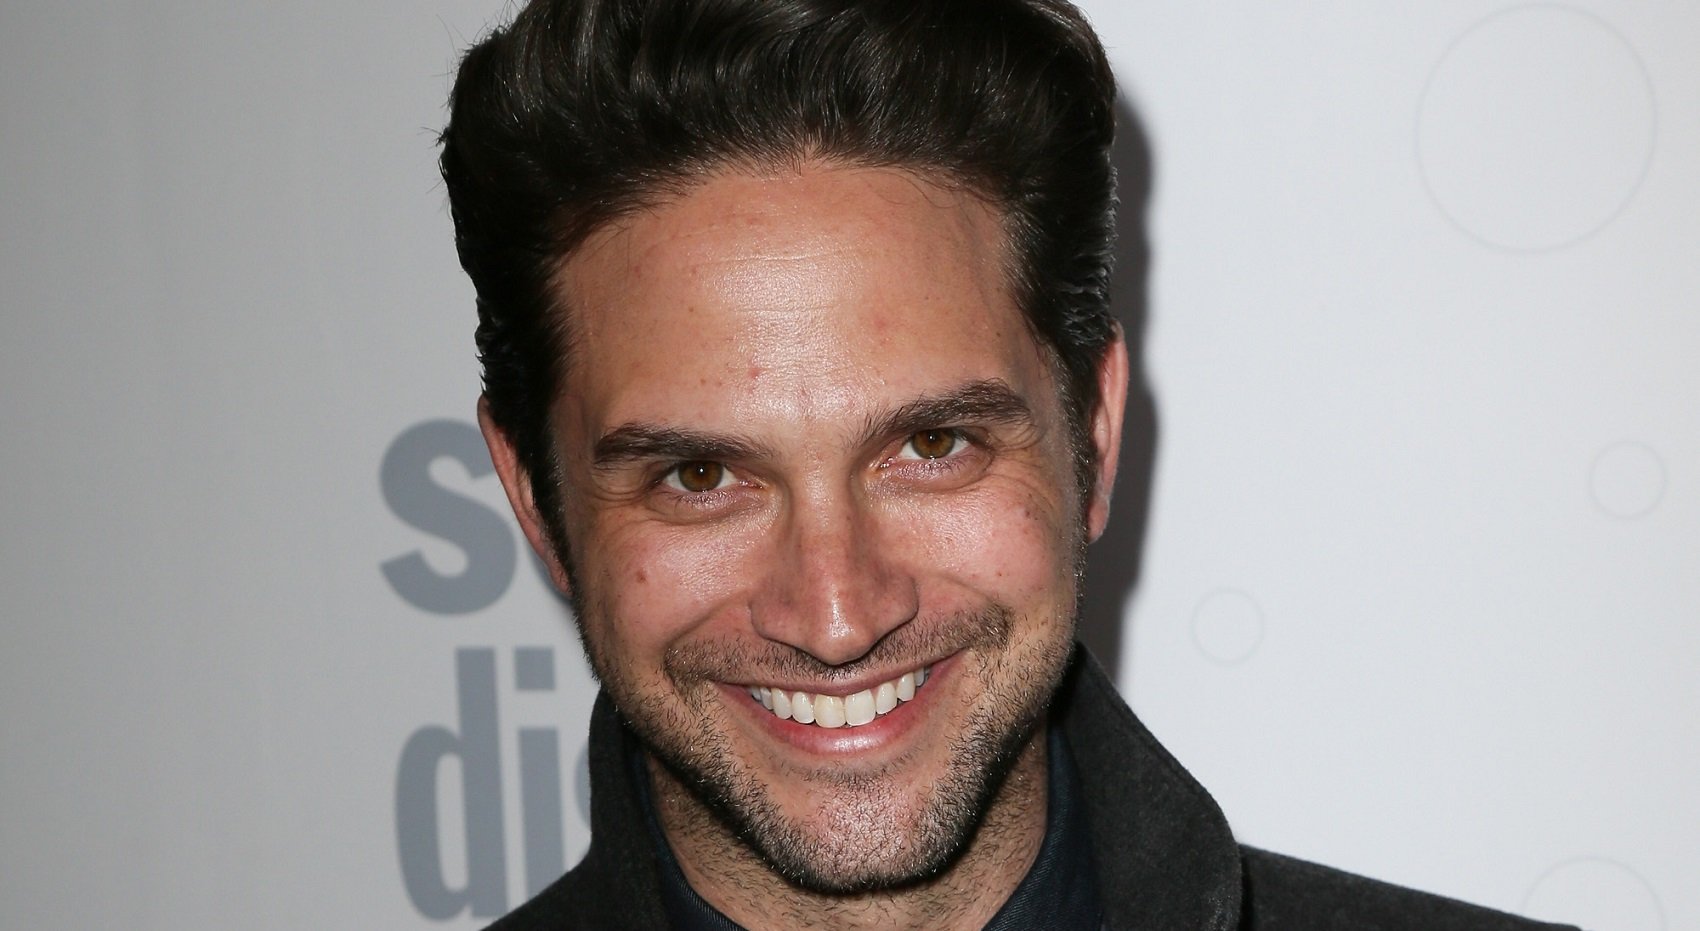 Days of Our Lives spoilers focus on Brandon Barash, pictured here against a soap opera digest background